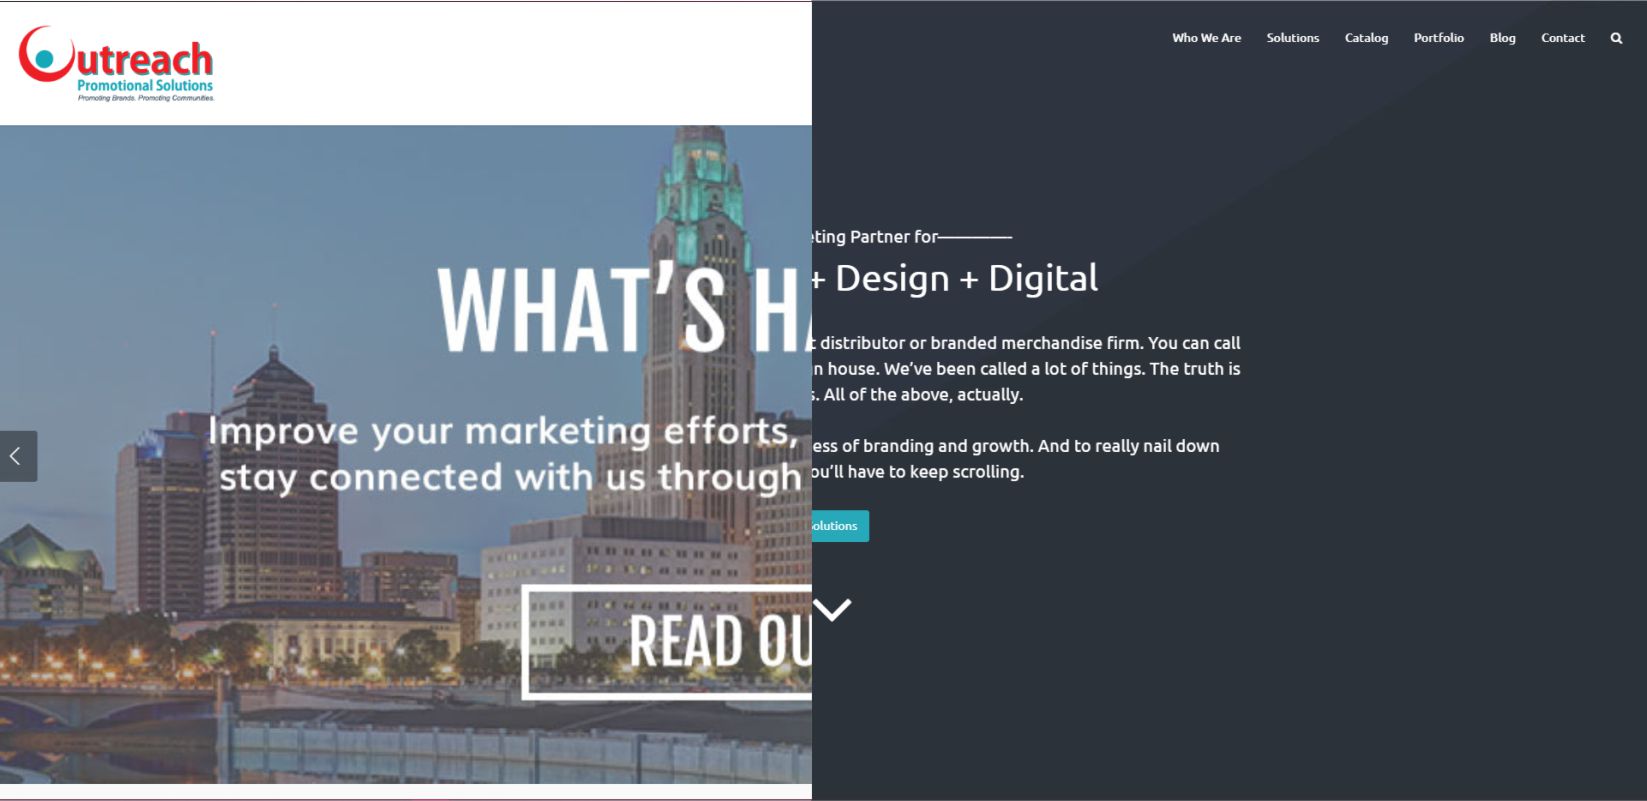 Outreach Promotional Solutions Website Redesign